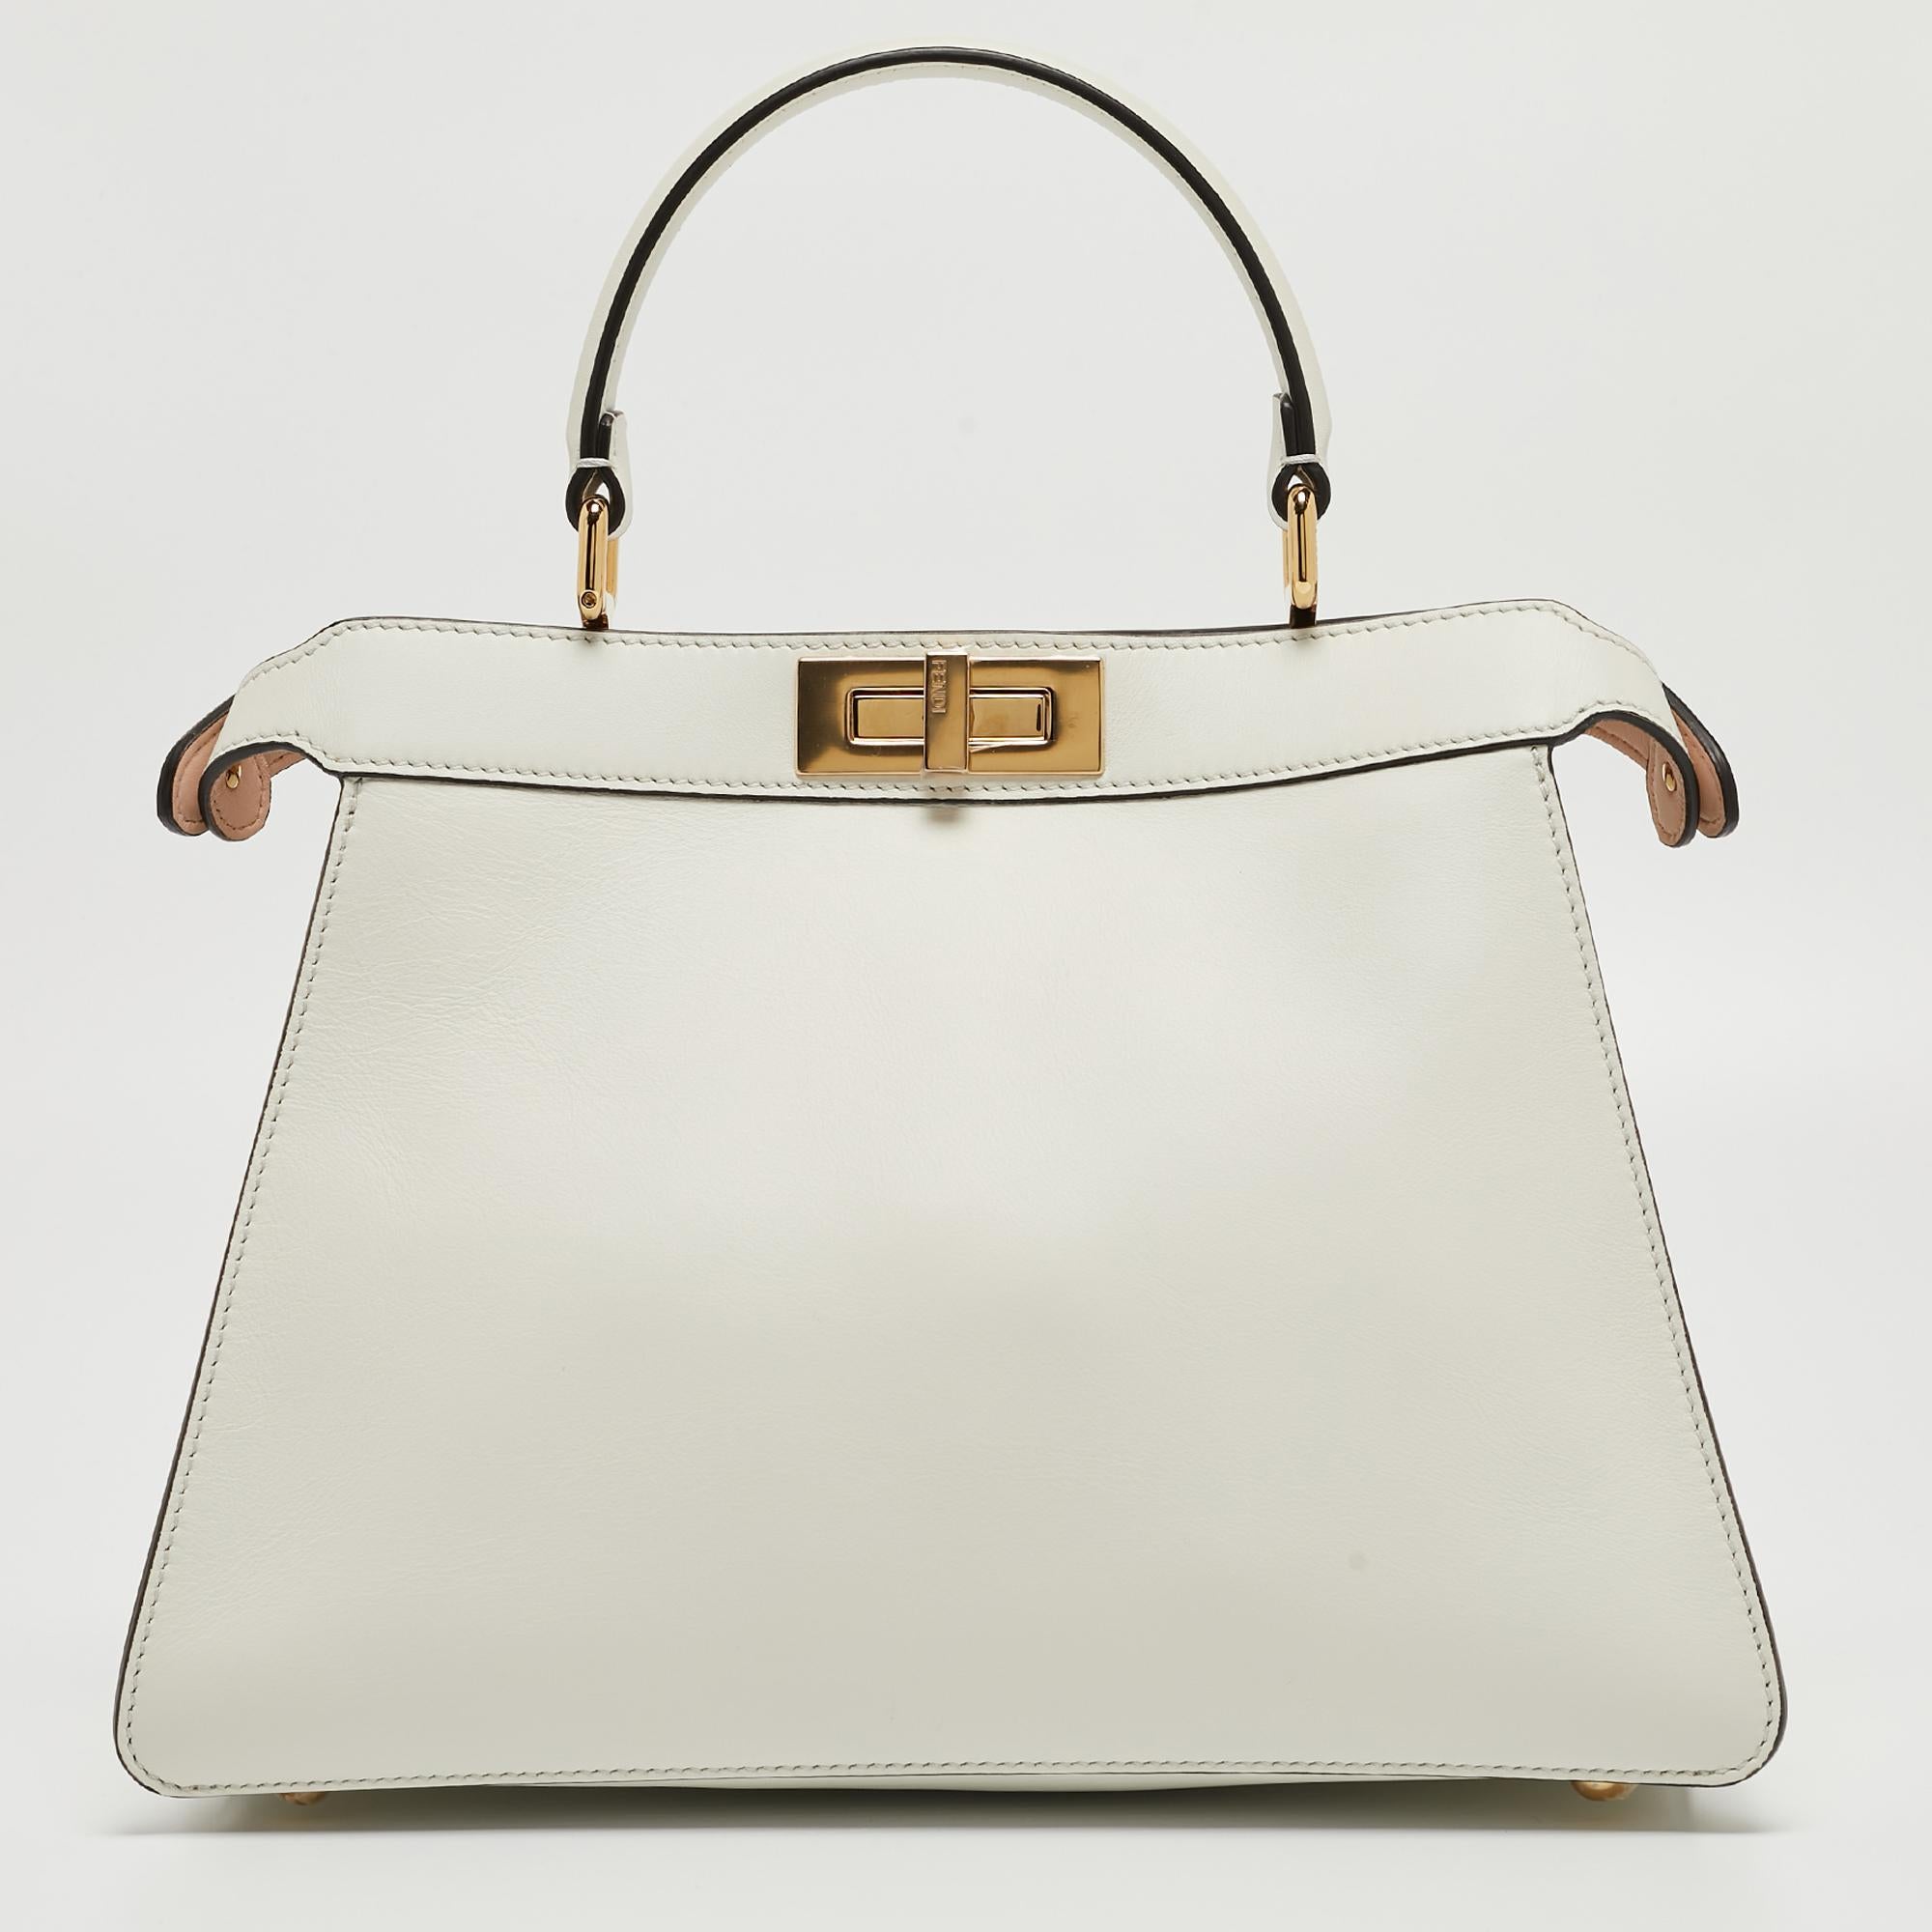 The Fendi Peekaboo ISeeU Top Handle Bag epitomizes luxury with its leather and iconic peekaboo design. The intricate inlay detailing adds a touch of sophistication, while the top handle offers a classic yet modern allure. This medium-sized